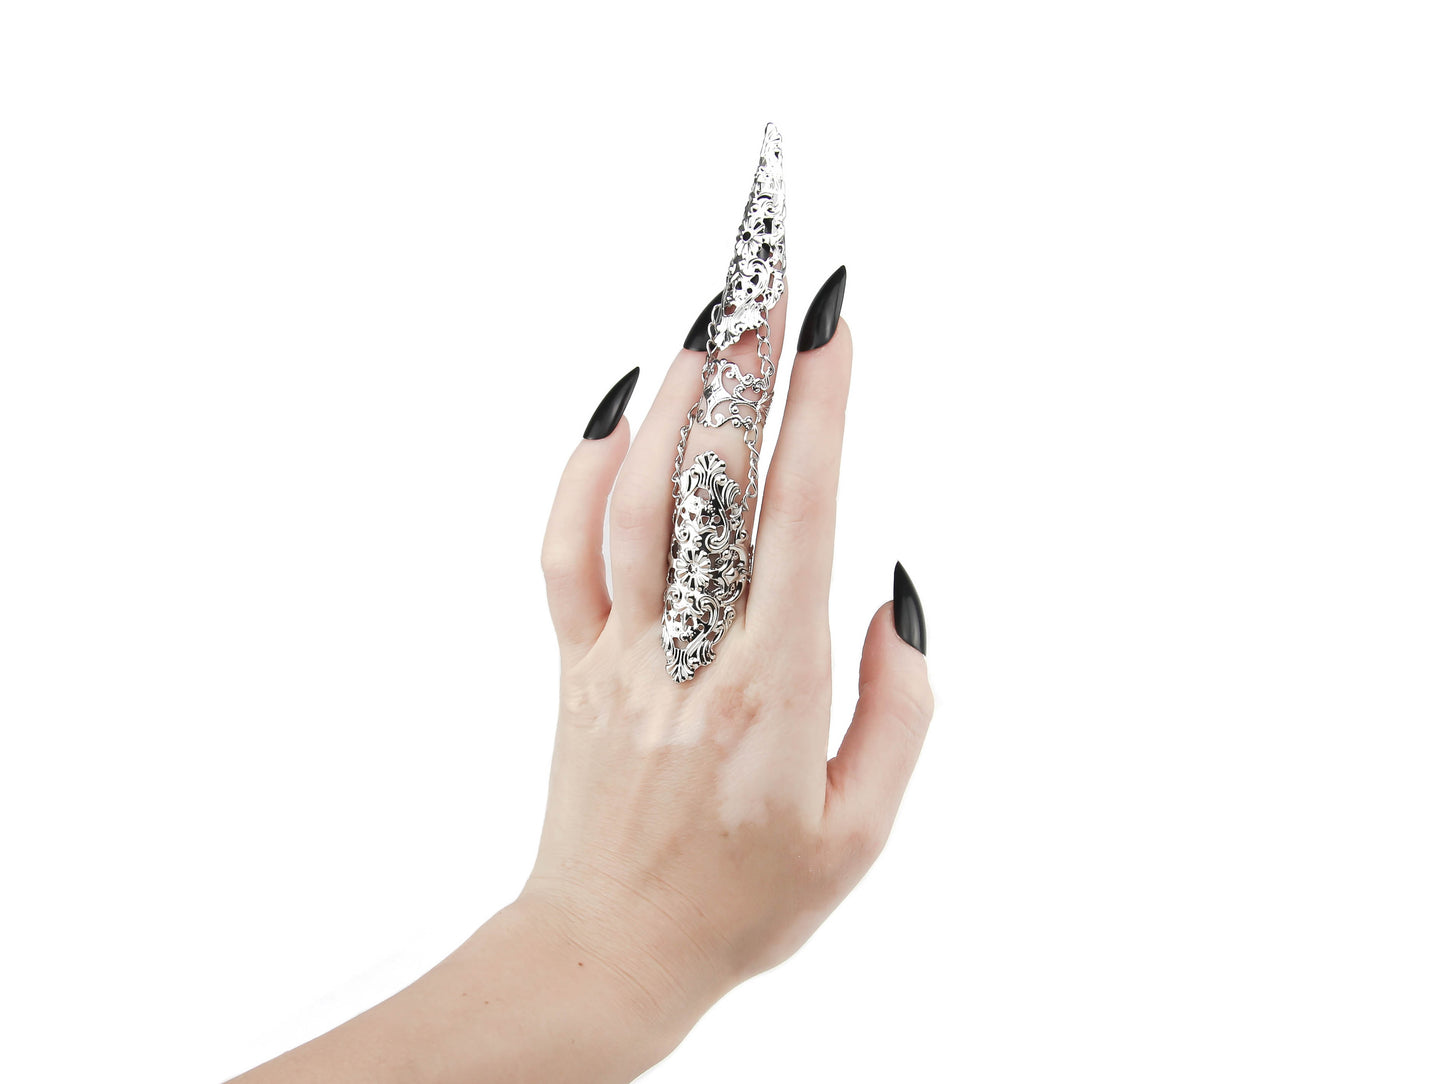 A sophisticated Myril Jewels full finger claw ring adorns the middle finger, its neo-goth design a testament to dark-avantgarde artistry. Intricate, lace-like patterns along the ring’s length epitomize gothic-chic, perfect for Halloween or as an everyday statement piece. This exclusive jewel, set against a backdrop of sleek black nails, captures the essence of Witchcore and is a must-have for any rave party, festival, or minimal goth jewelry collection